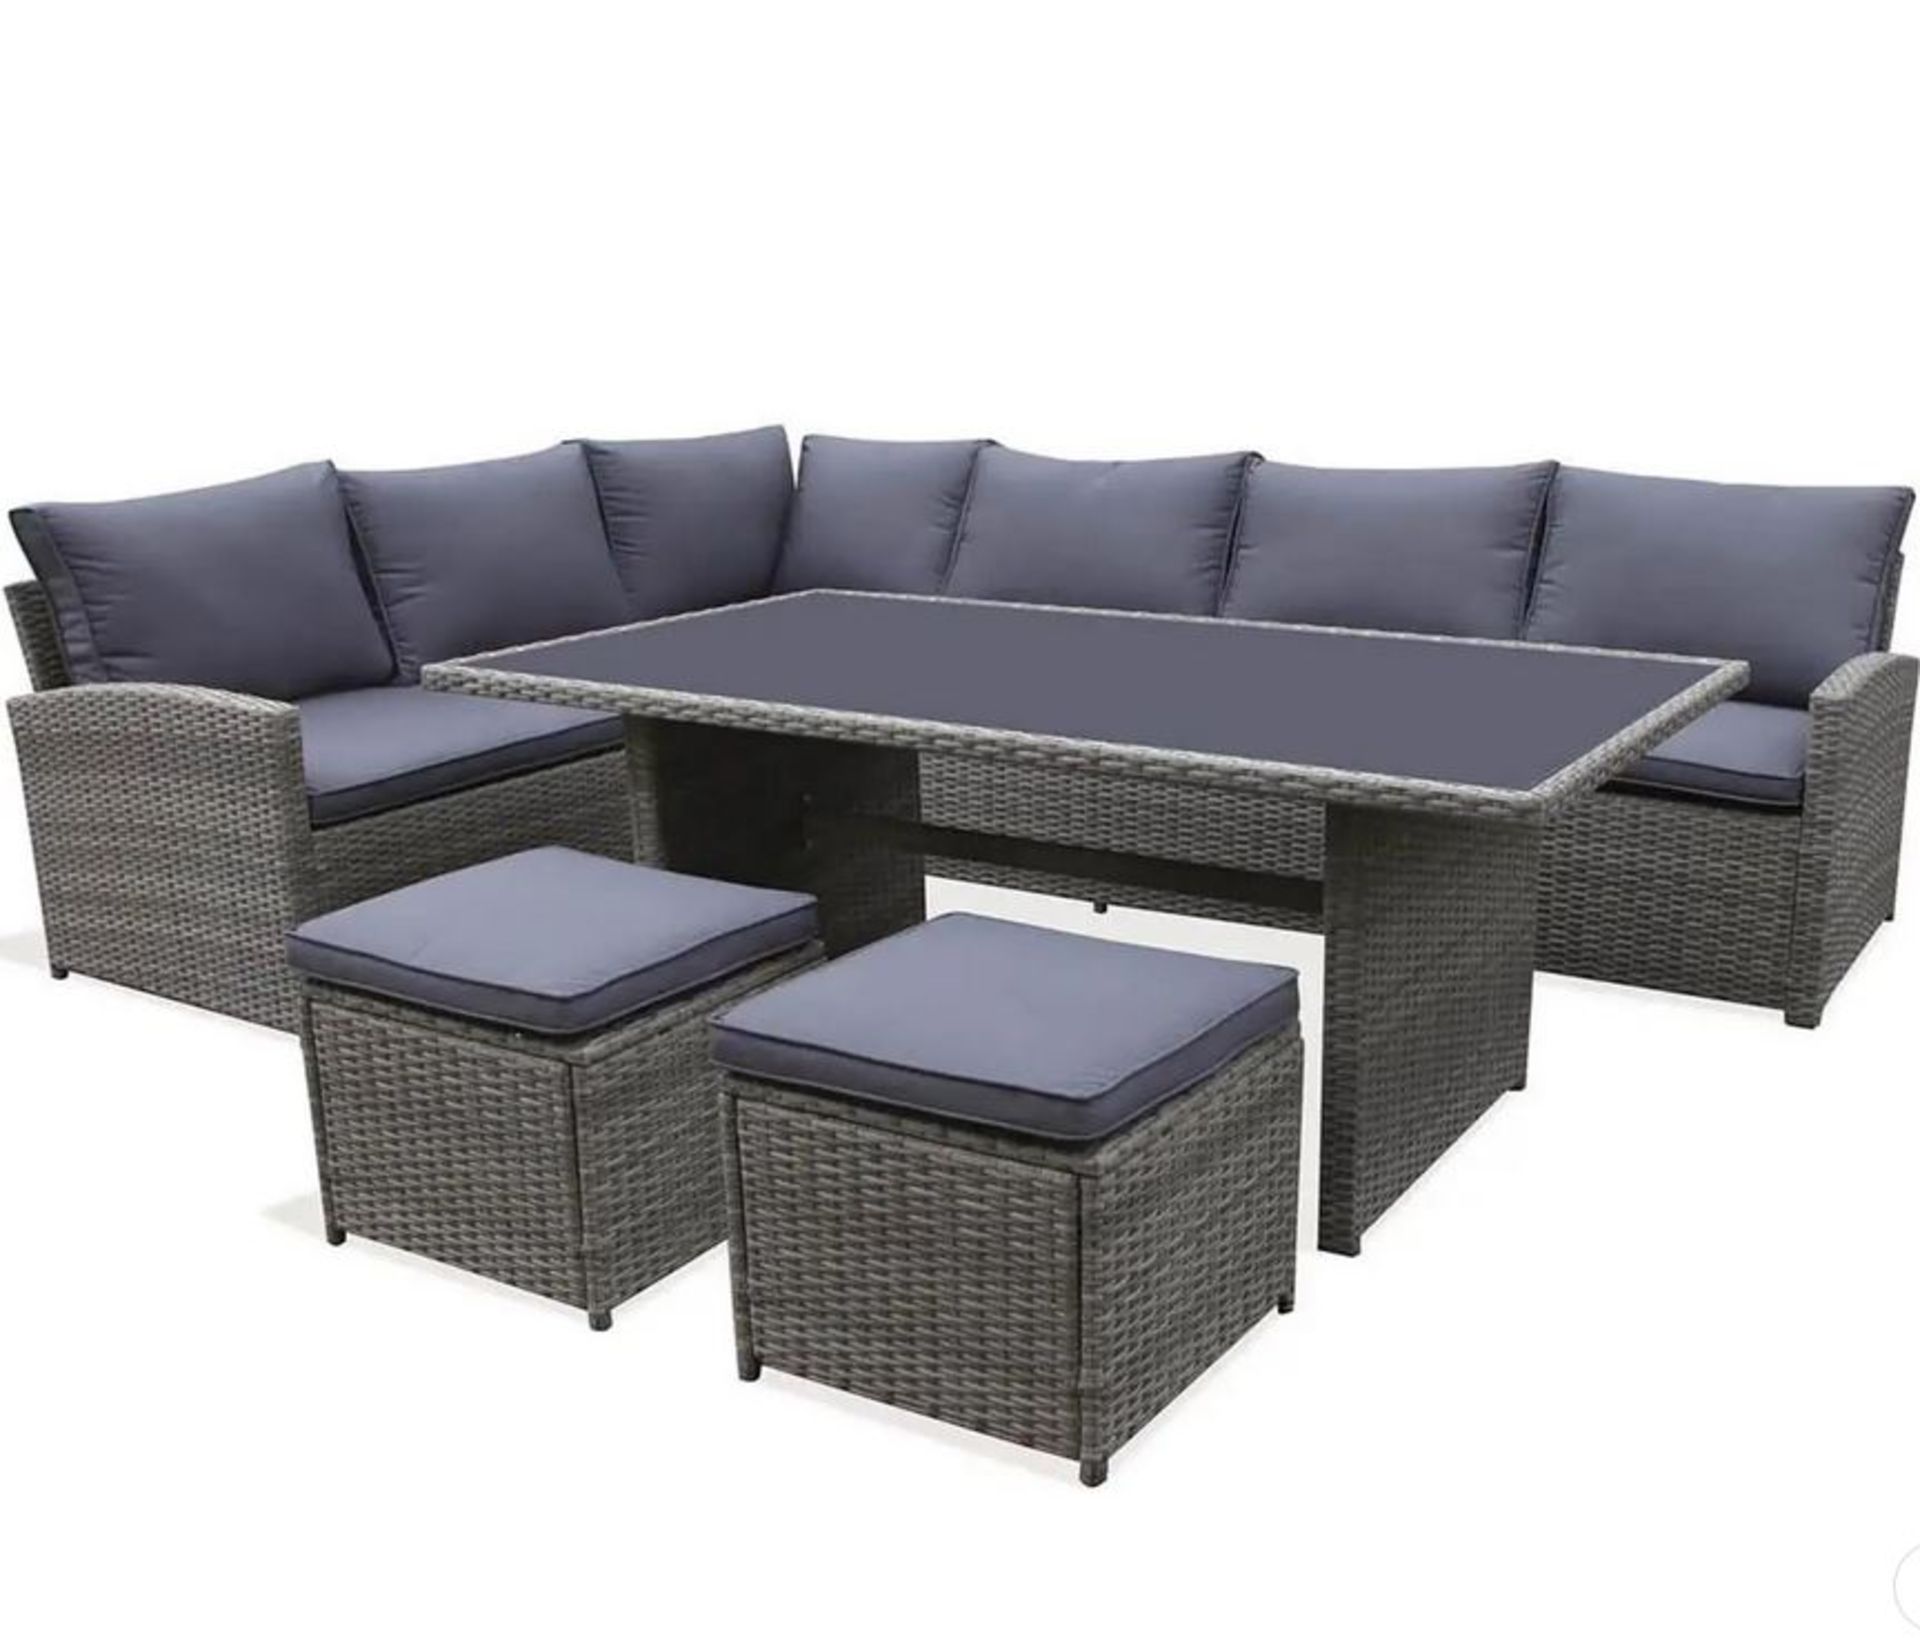 (R16) 1x Corner Sofa Set Rattan With Toughened Glass Table & 7x Cushions. 2x Stools With Cushion.